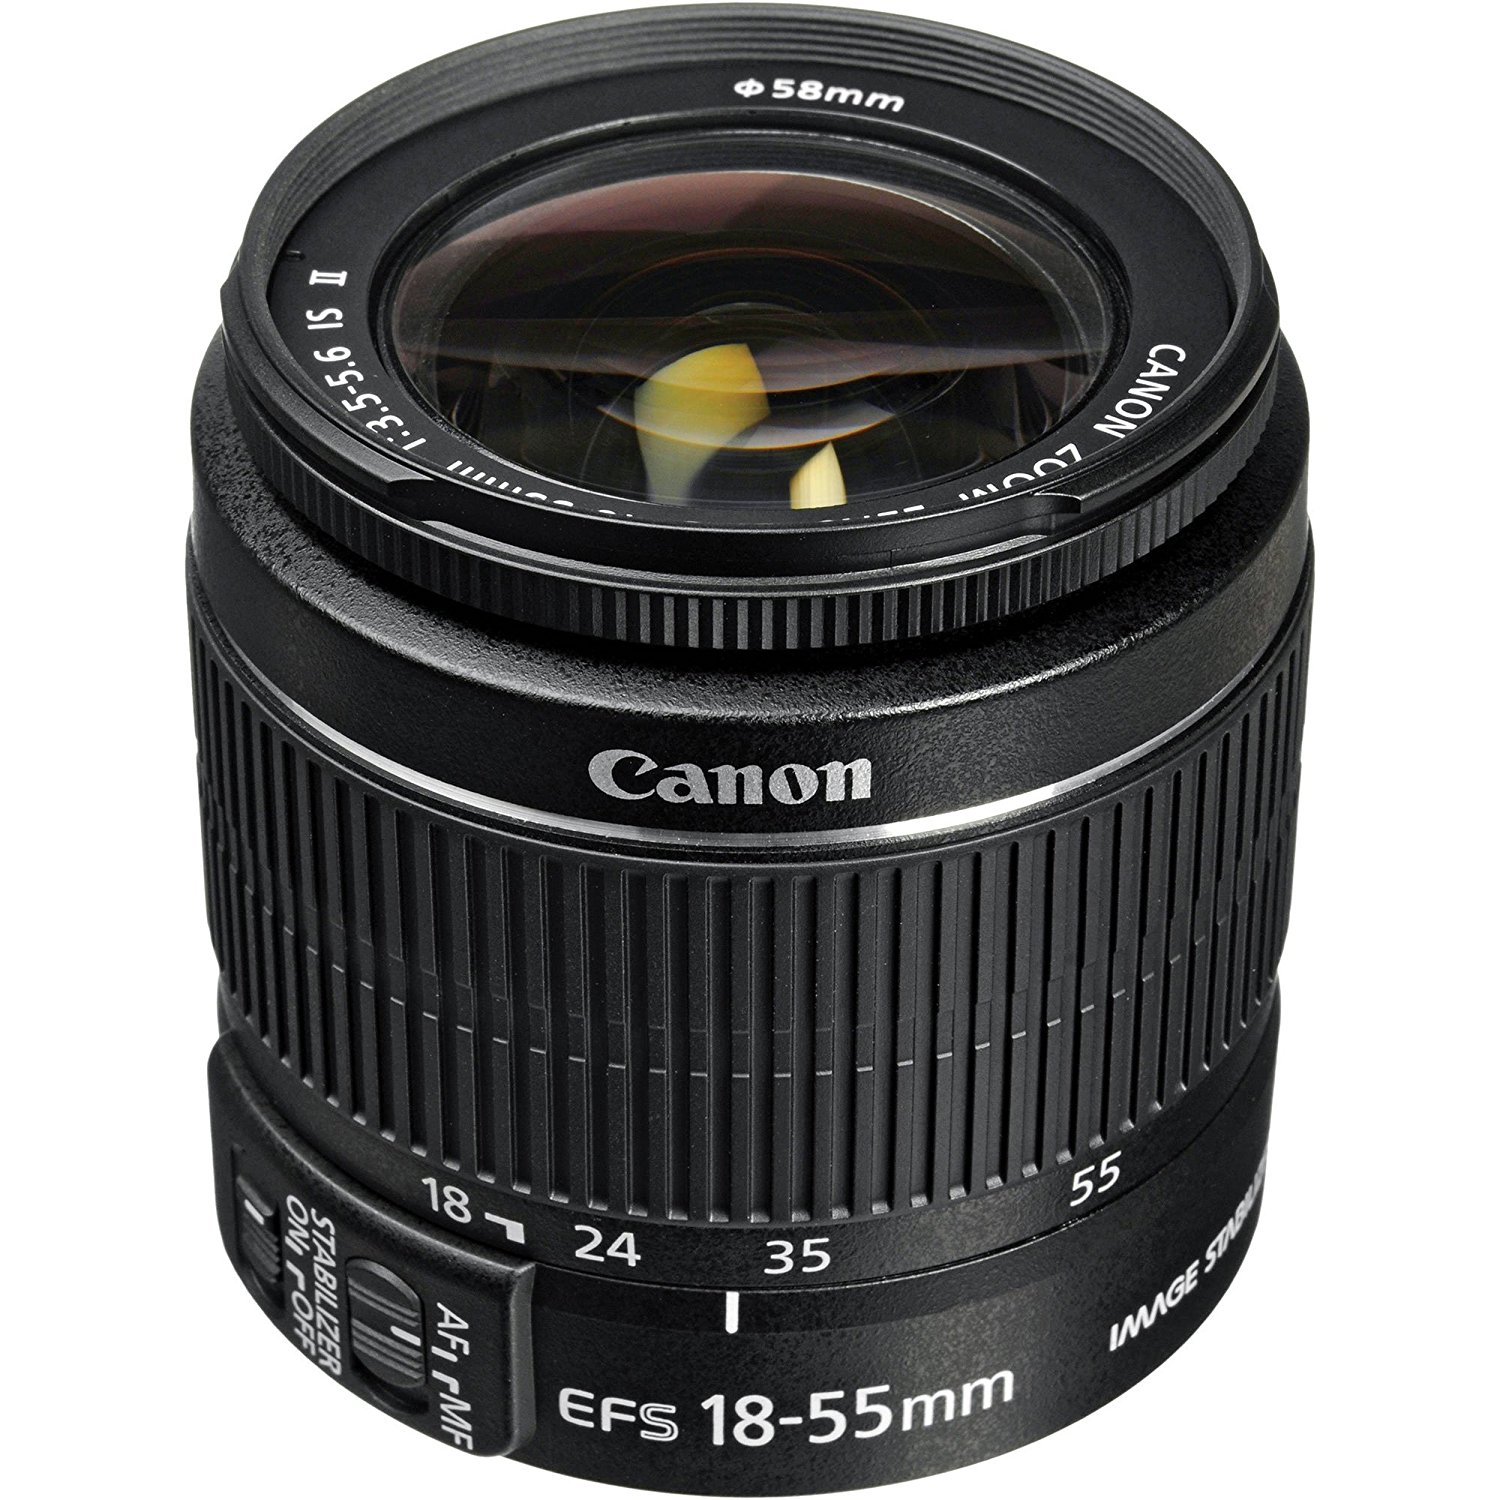 Canon EOS Rebel T6 Bundle With EF-S 18-55mm f/3.5-5.6 IS II Lens + Advanced Accessory Bundle - image 4 of 7